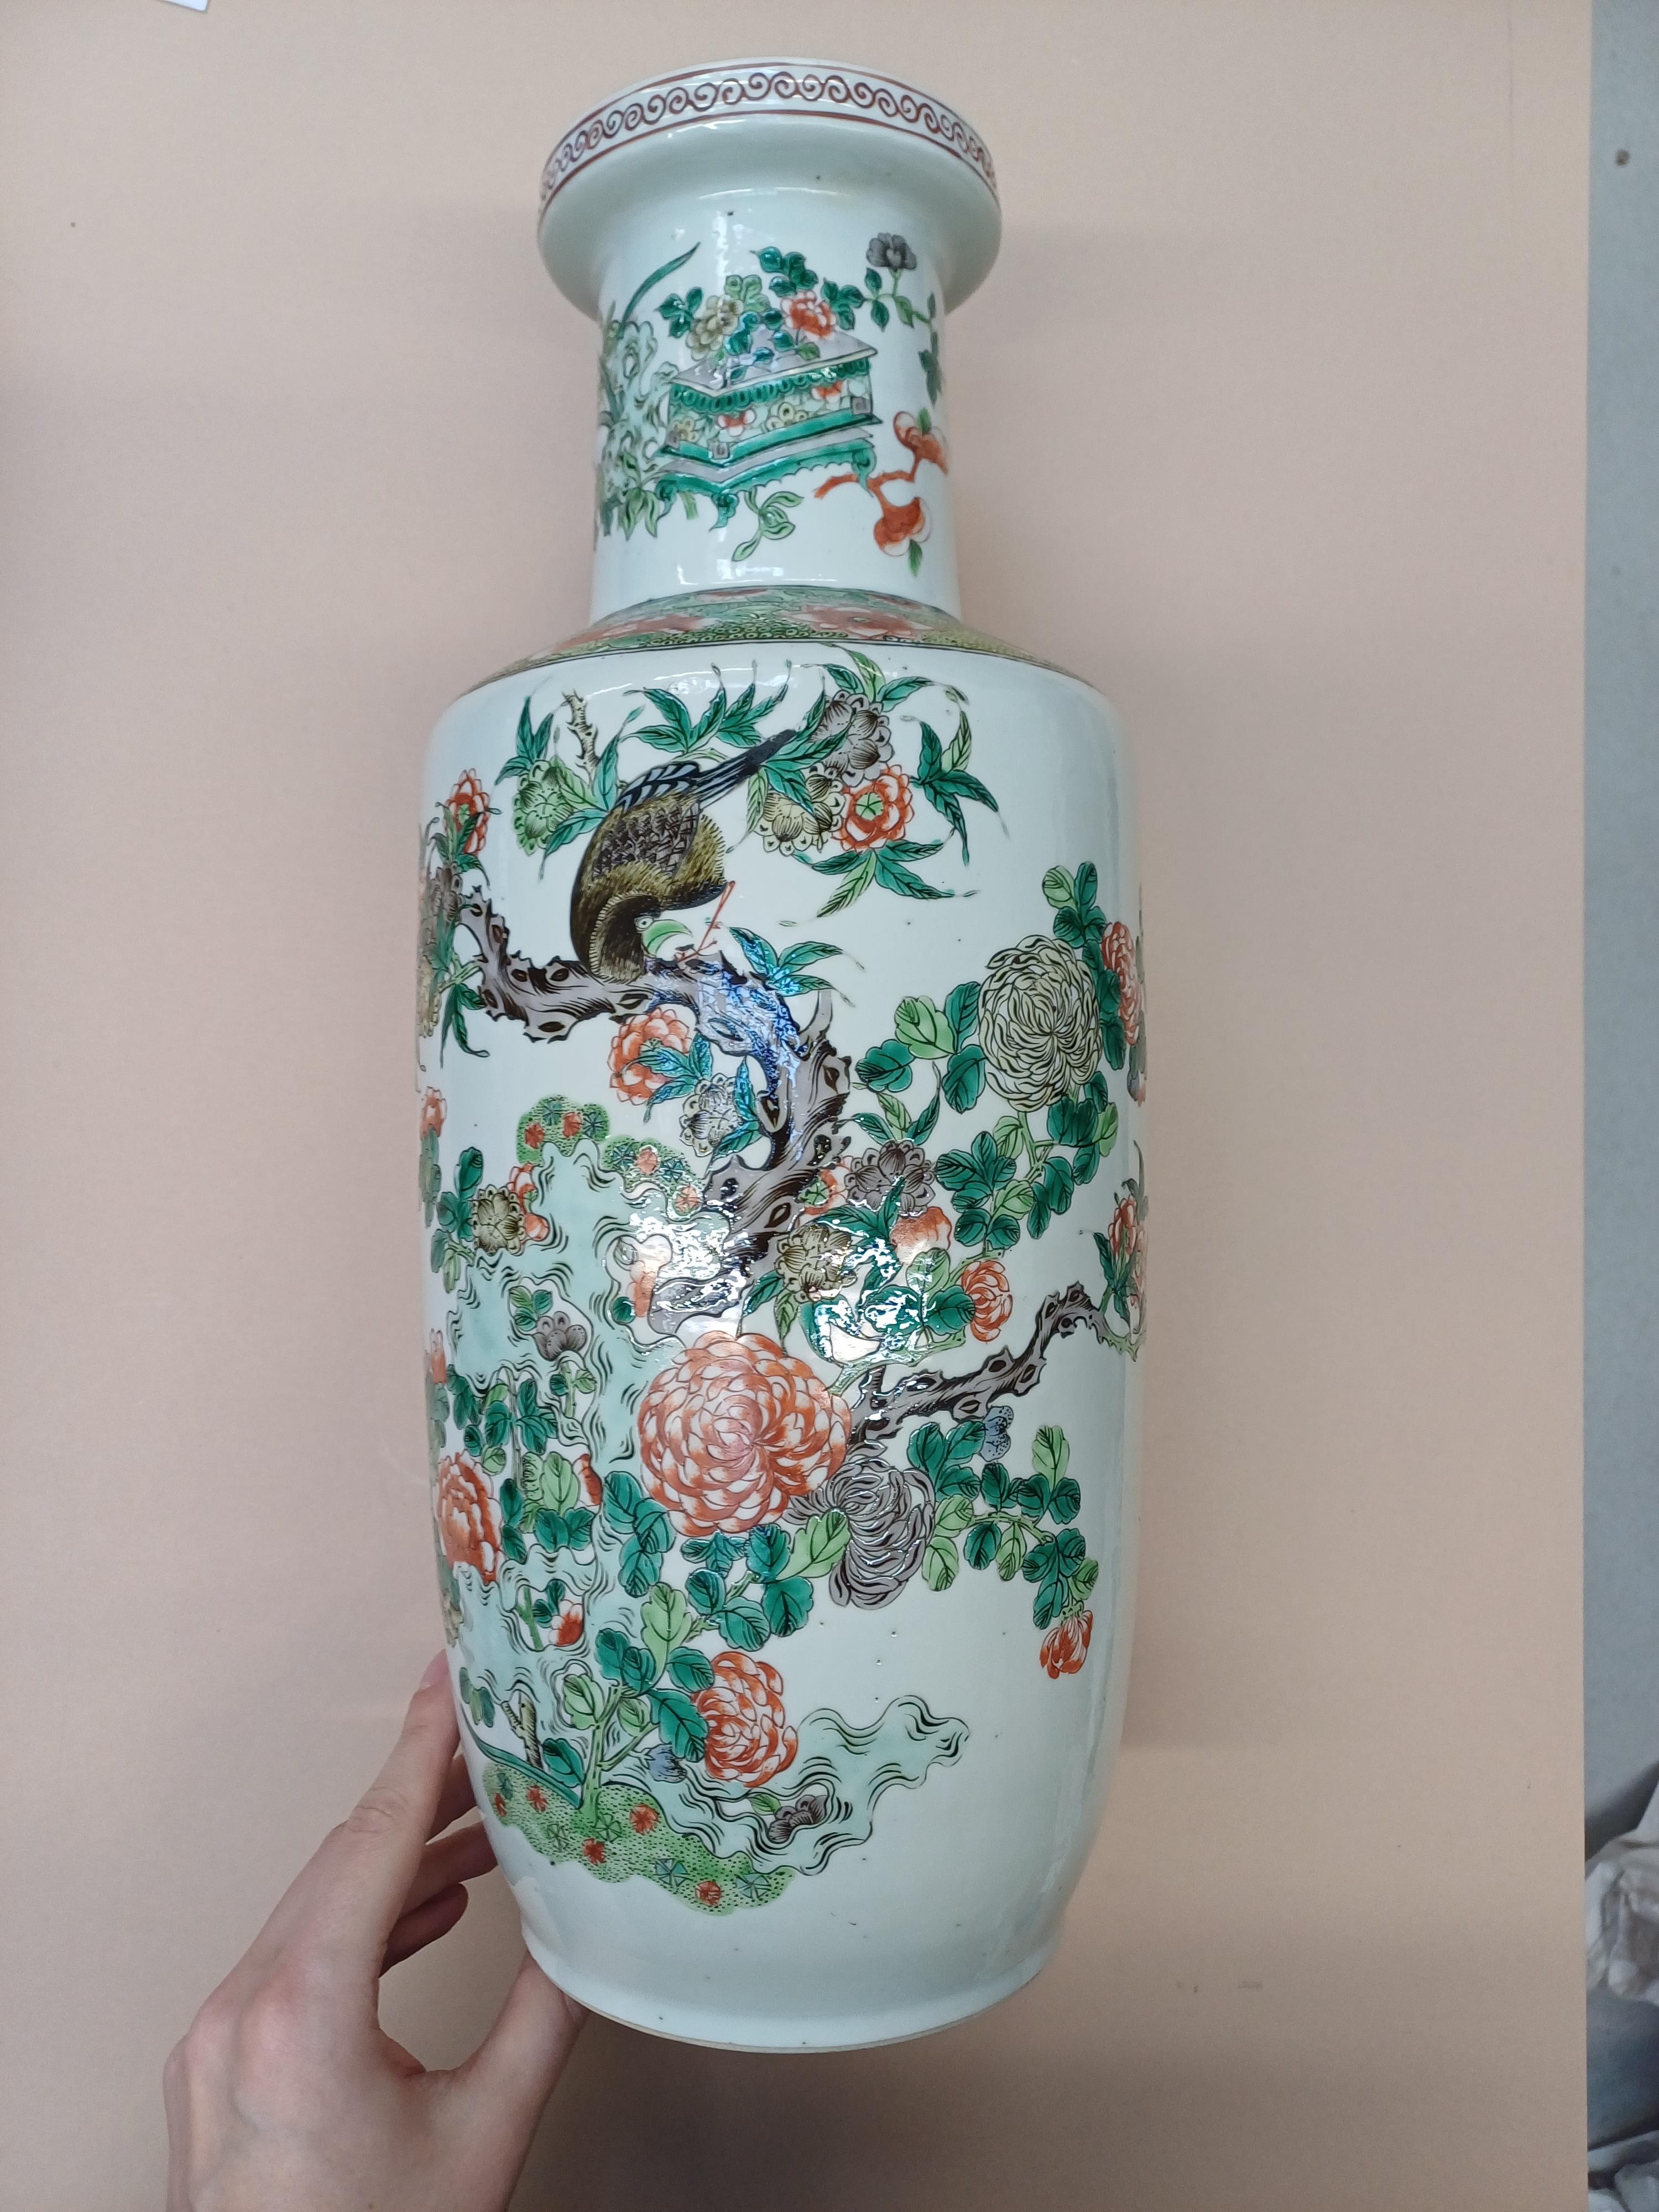 A PAIR OF FINE CHINESE FAMILLE-VERTE ‘BIRD AND BLOSSOM’ VASES 清康熙 五彩花鳥圖紋瓶一對 - Image 11 of 16